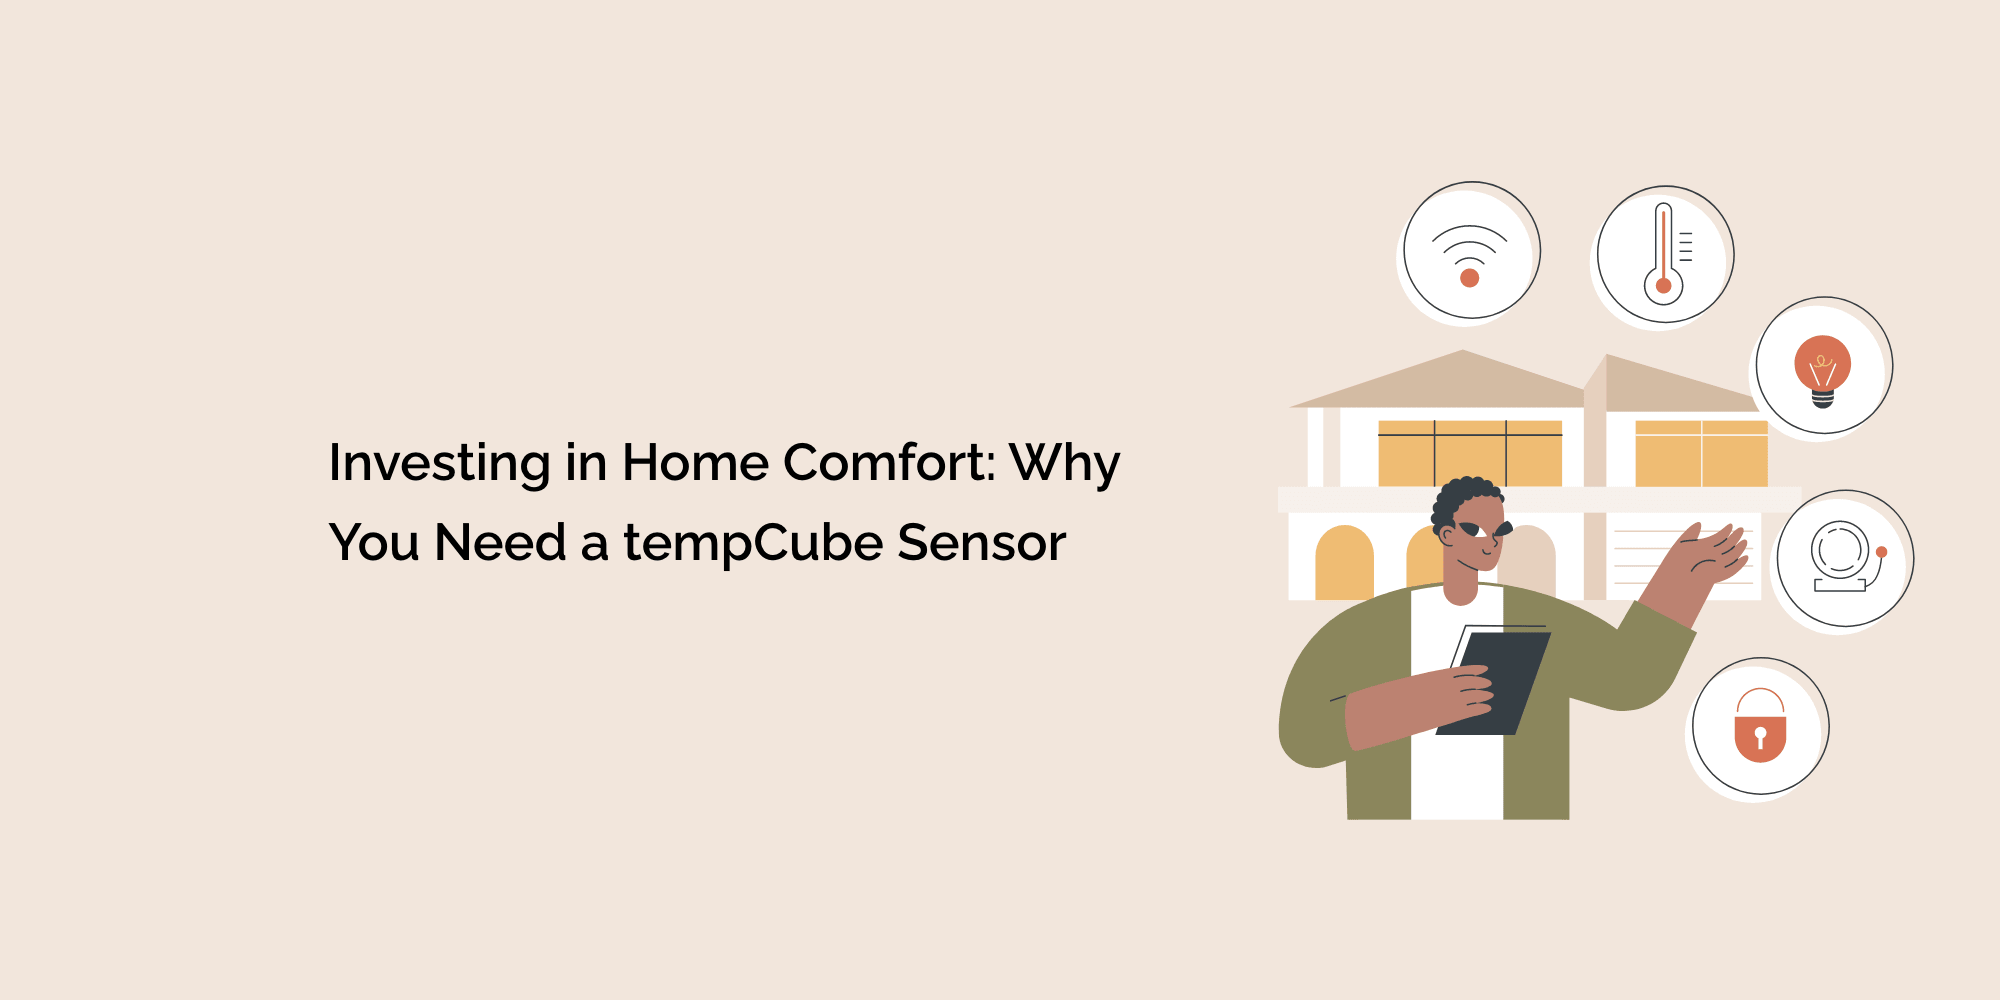 Investing in Home Comfort: Why You Need a tempCube Sensor